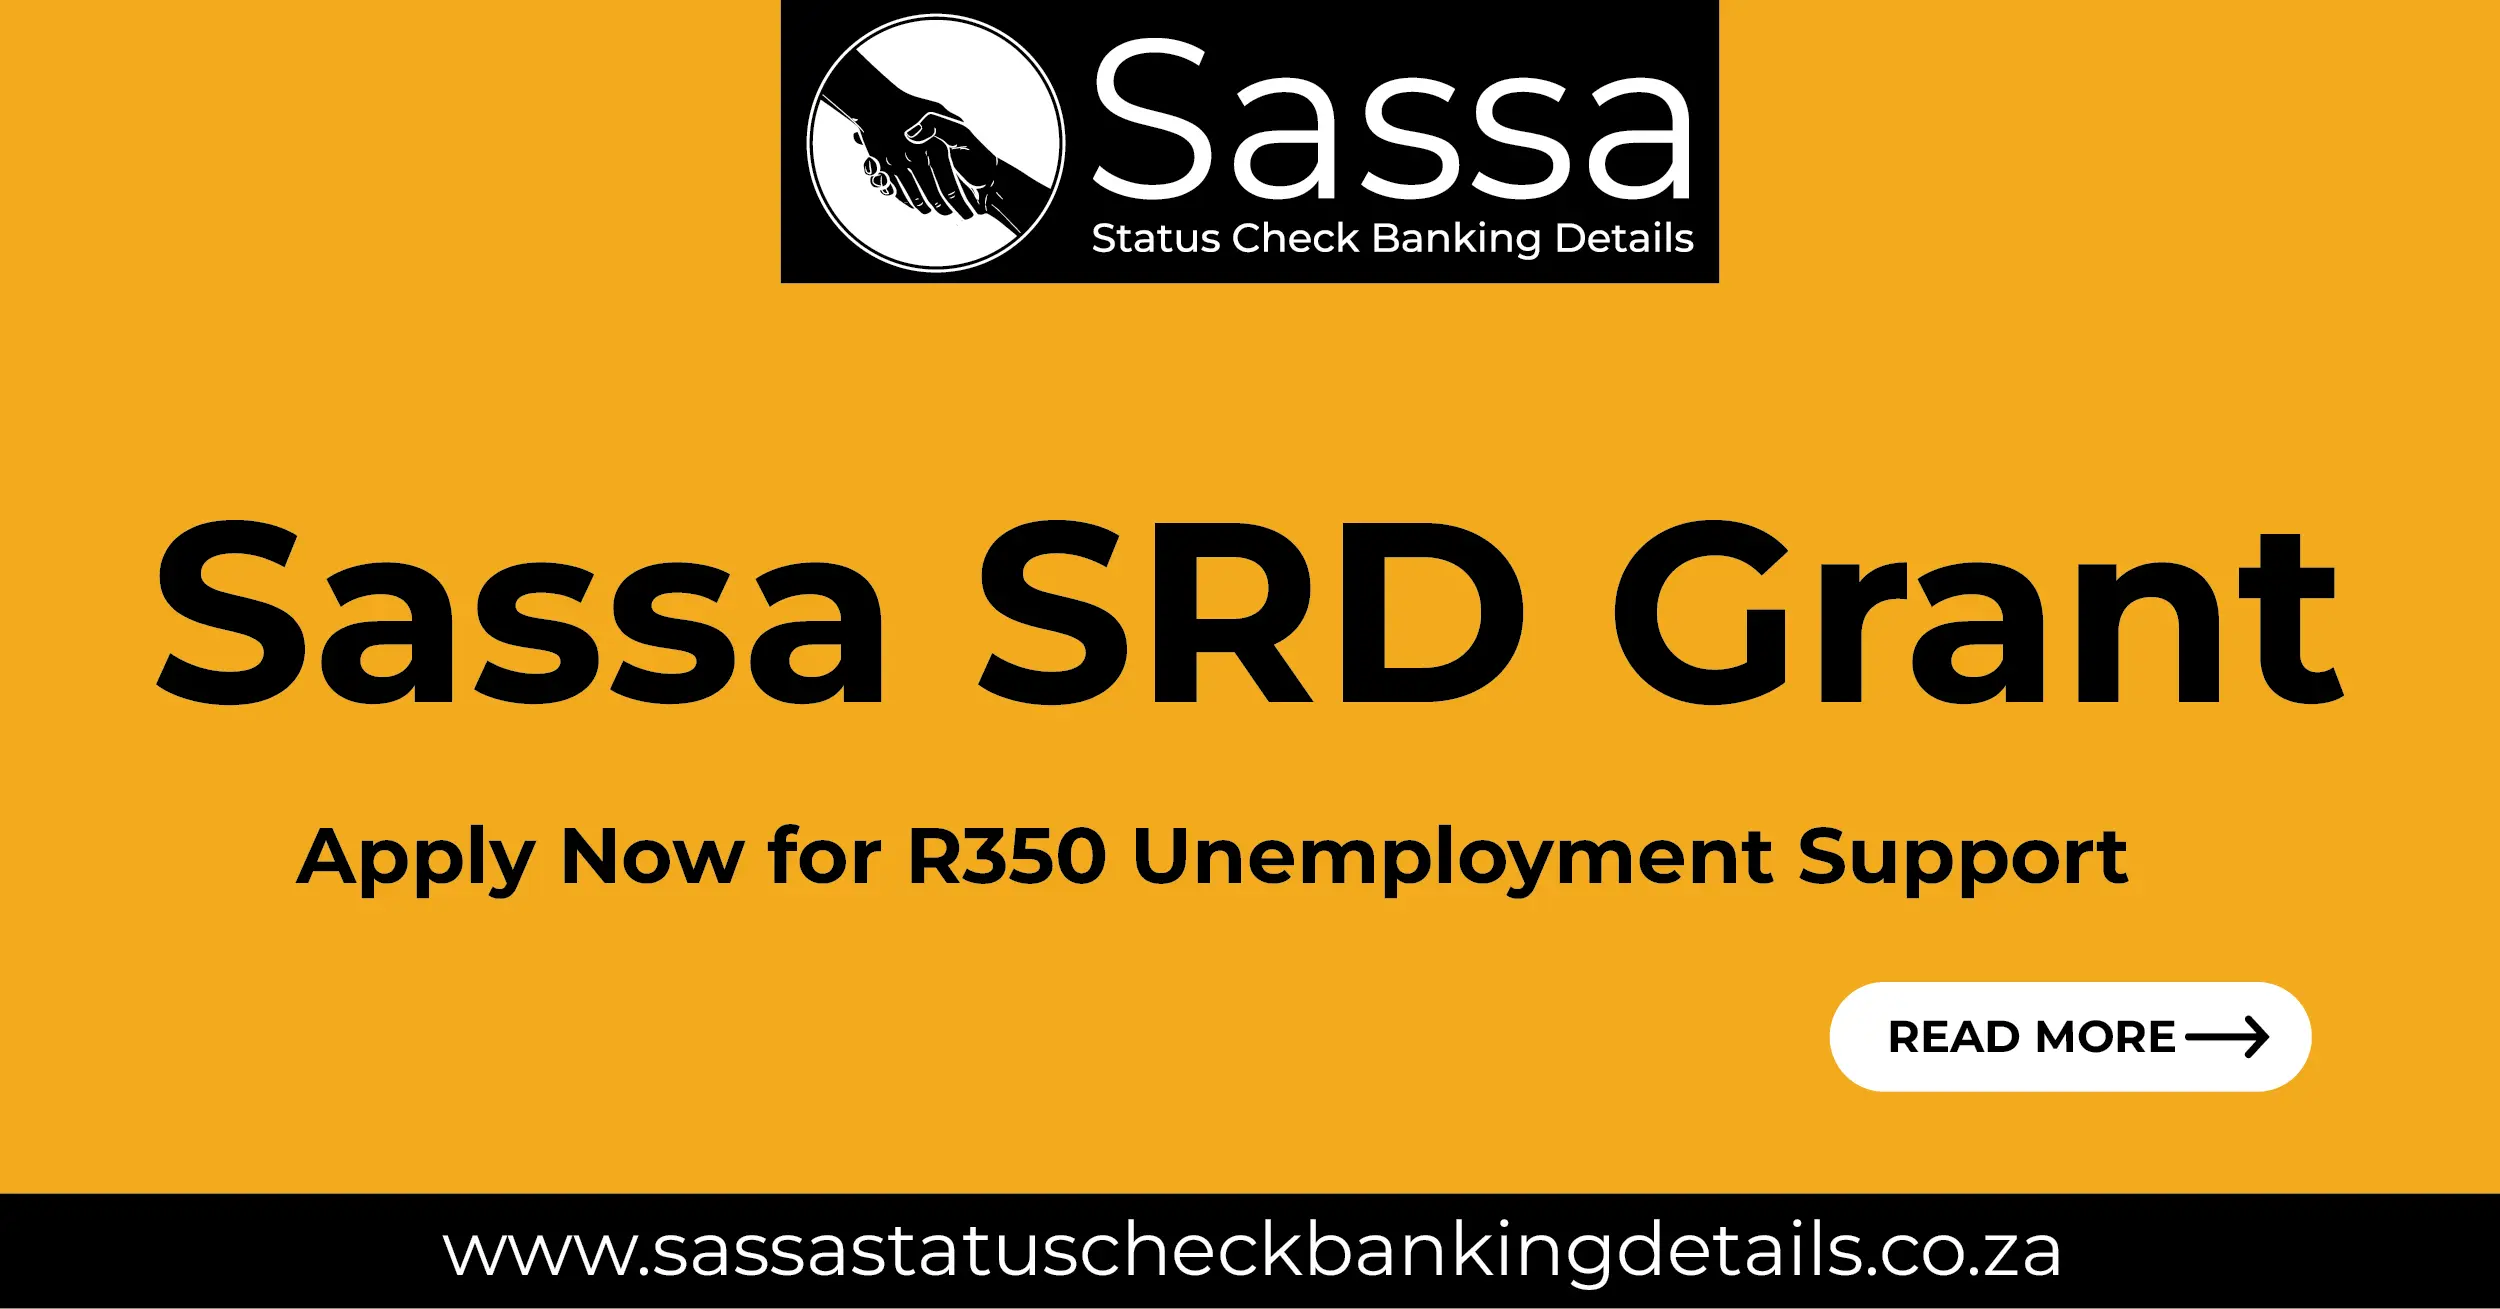 Sassa SRD Grant: Apply Now for R350 Unemployment Support